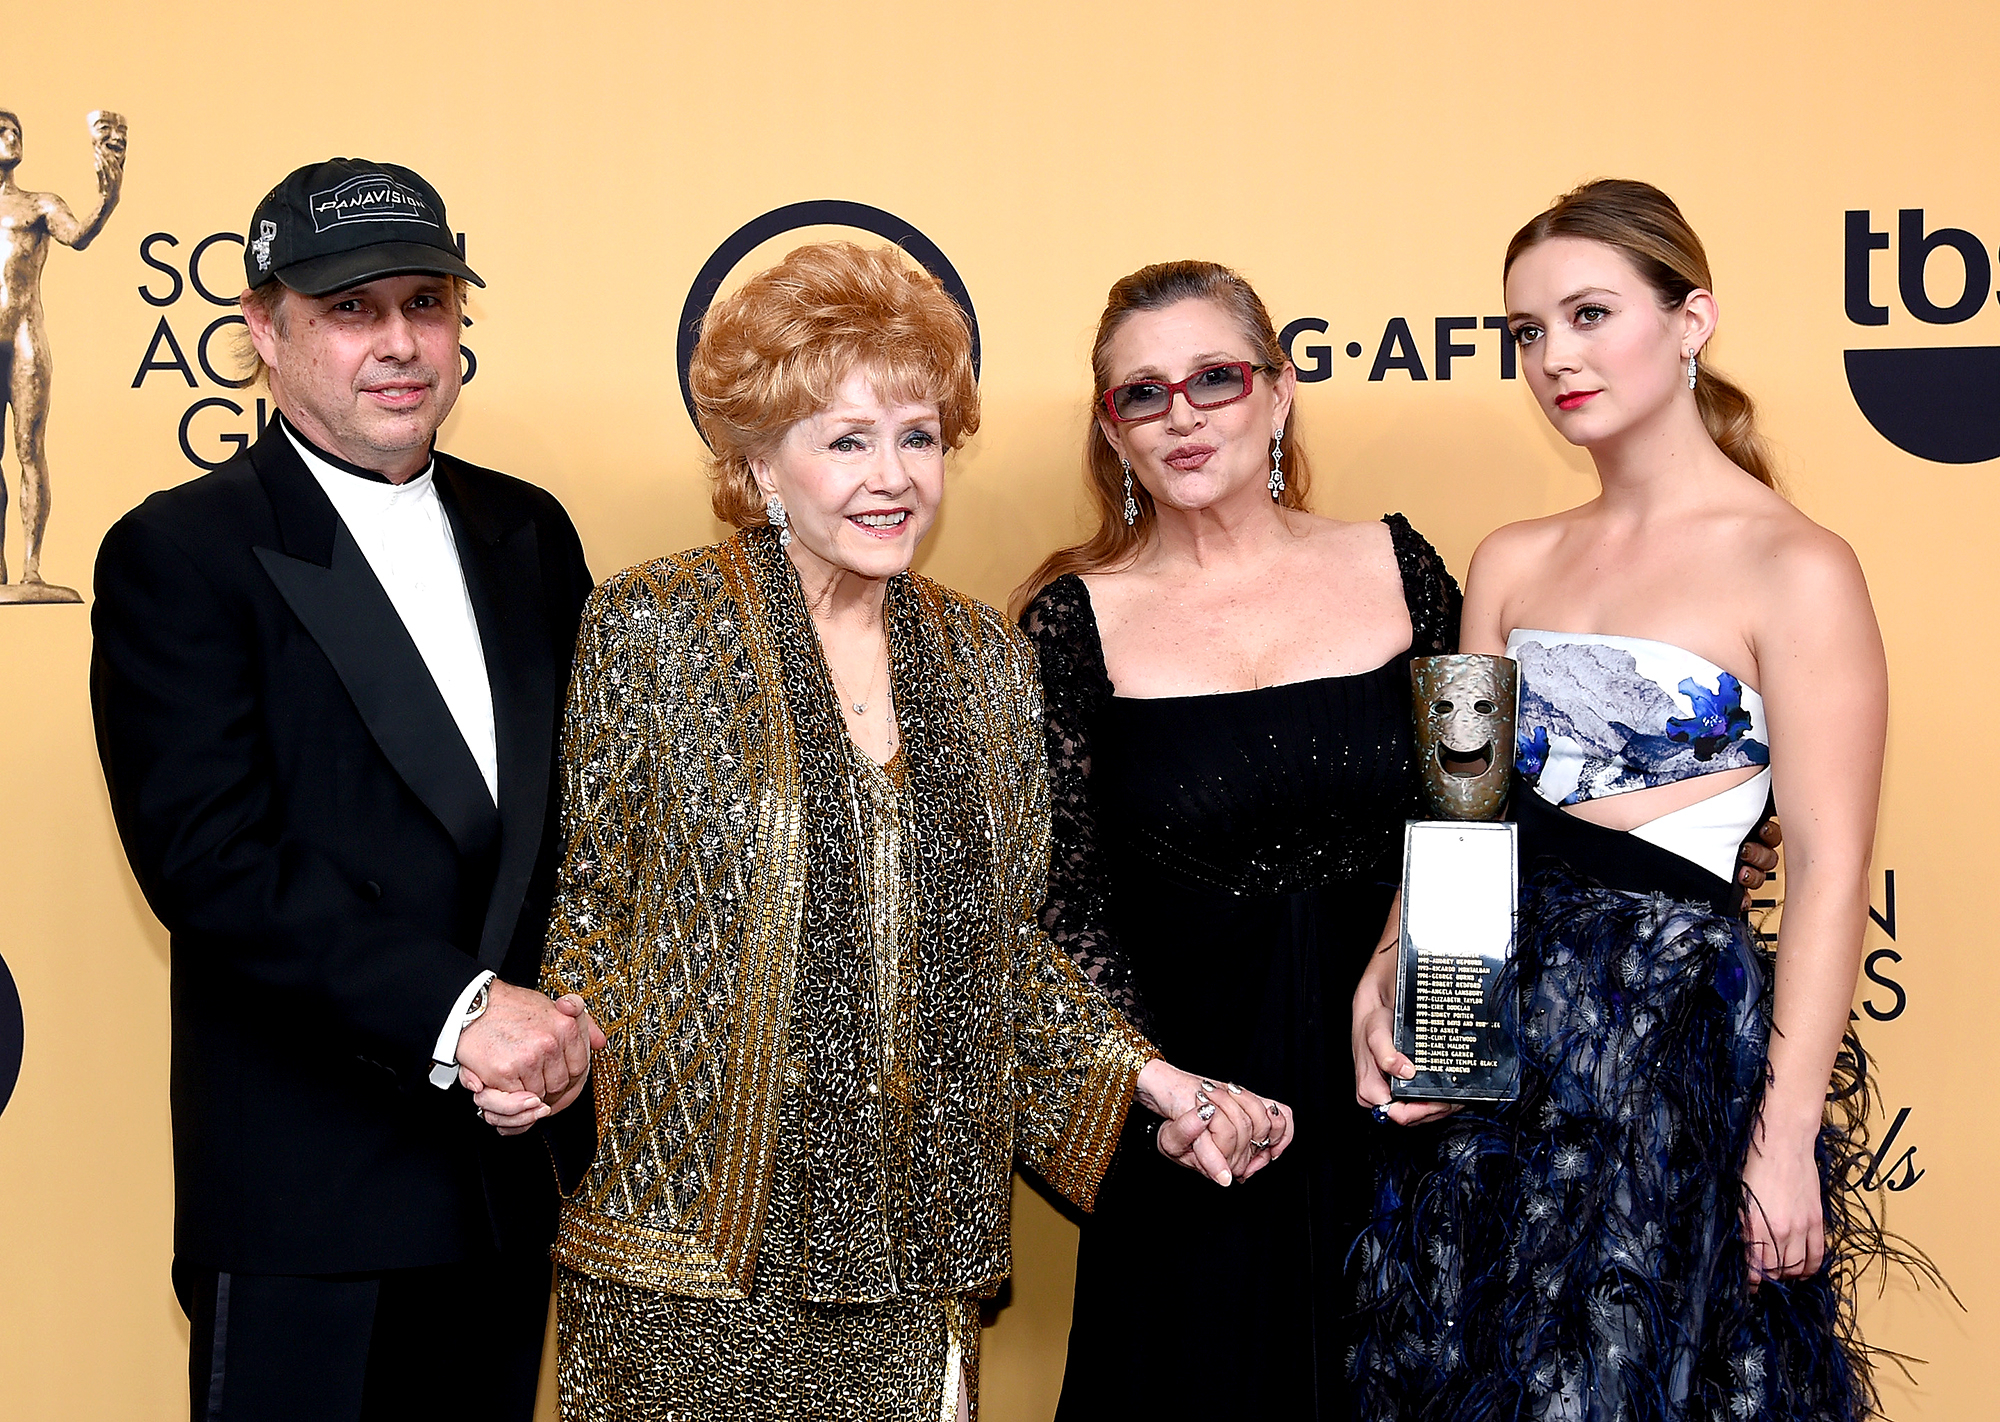 Todd Fisher Shares Debbie Reynolds' Passion for Hollywood History